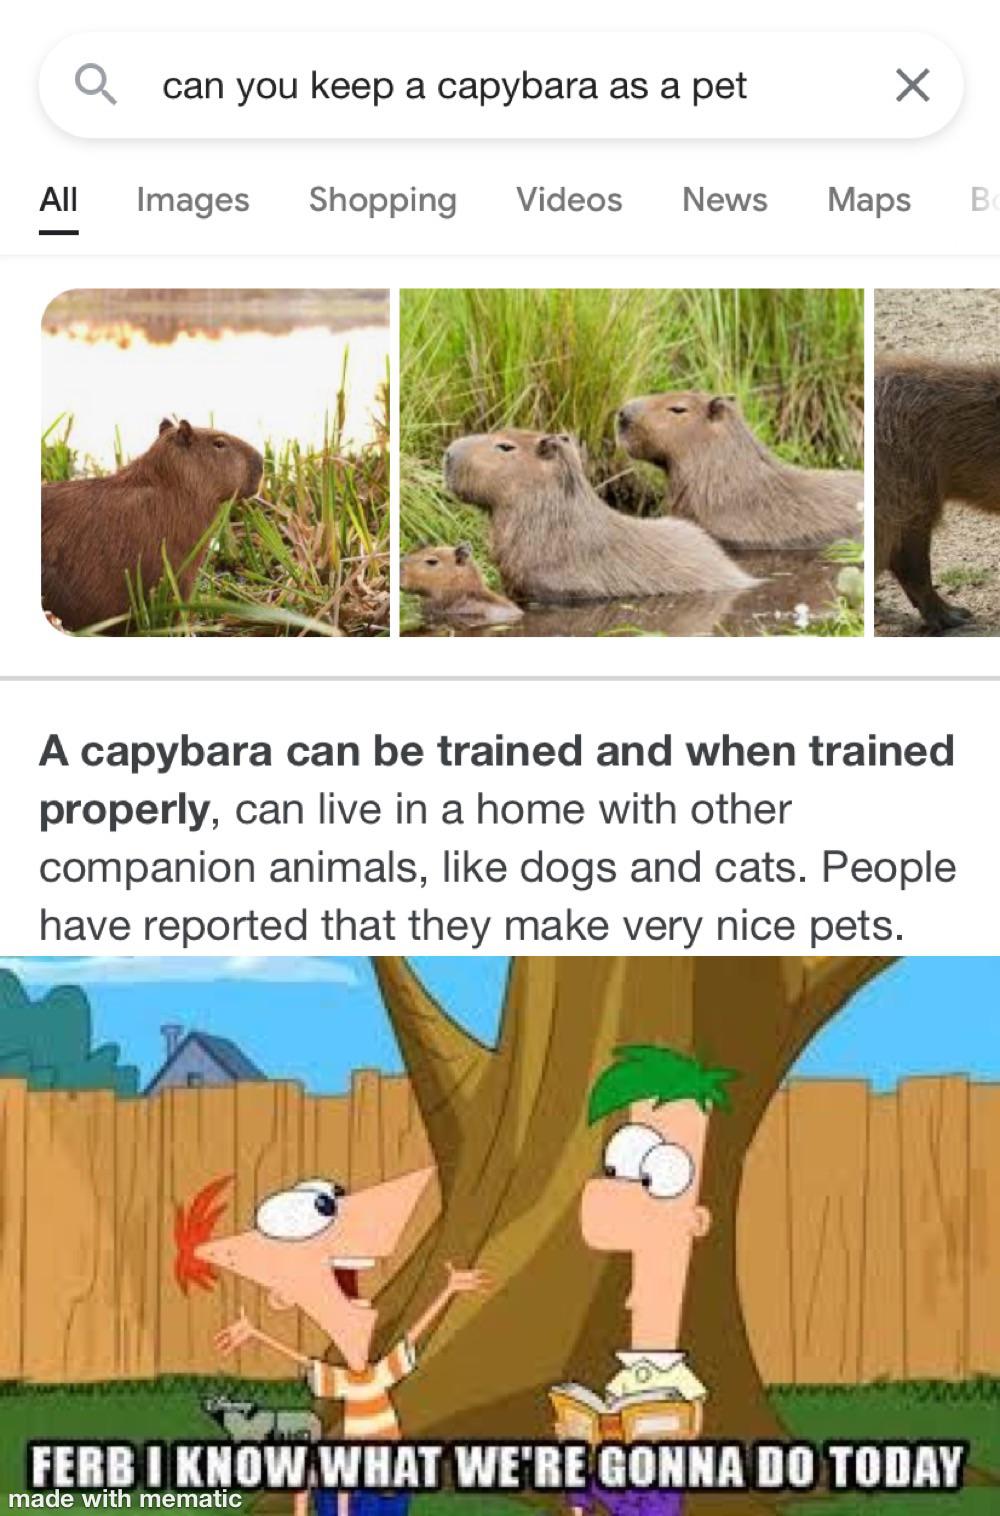 phineas and ferb - can you keep a capybara as a pet All Images Shopping Videos News Maps B A capybara can be trained and when trained properly, can live in a home with other companion animals, dogs and cats. People have reported that they make very nice p